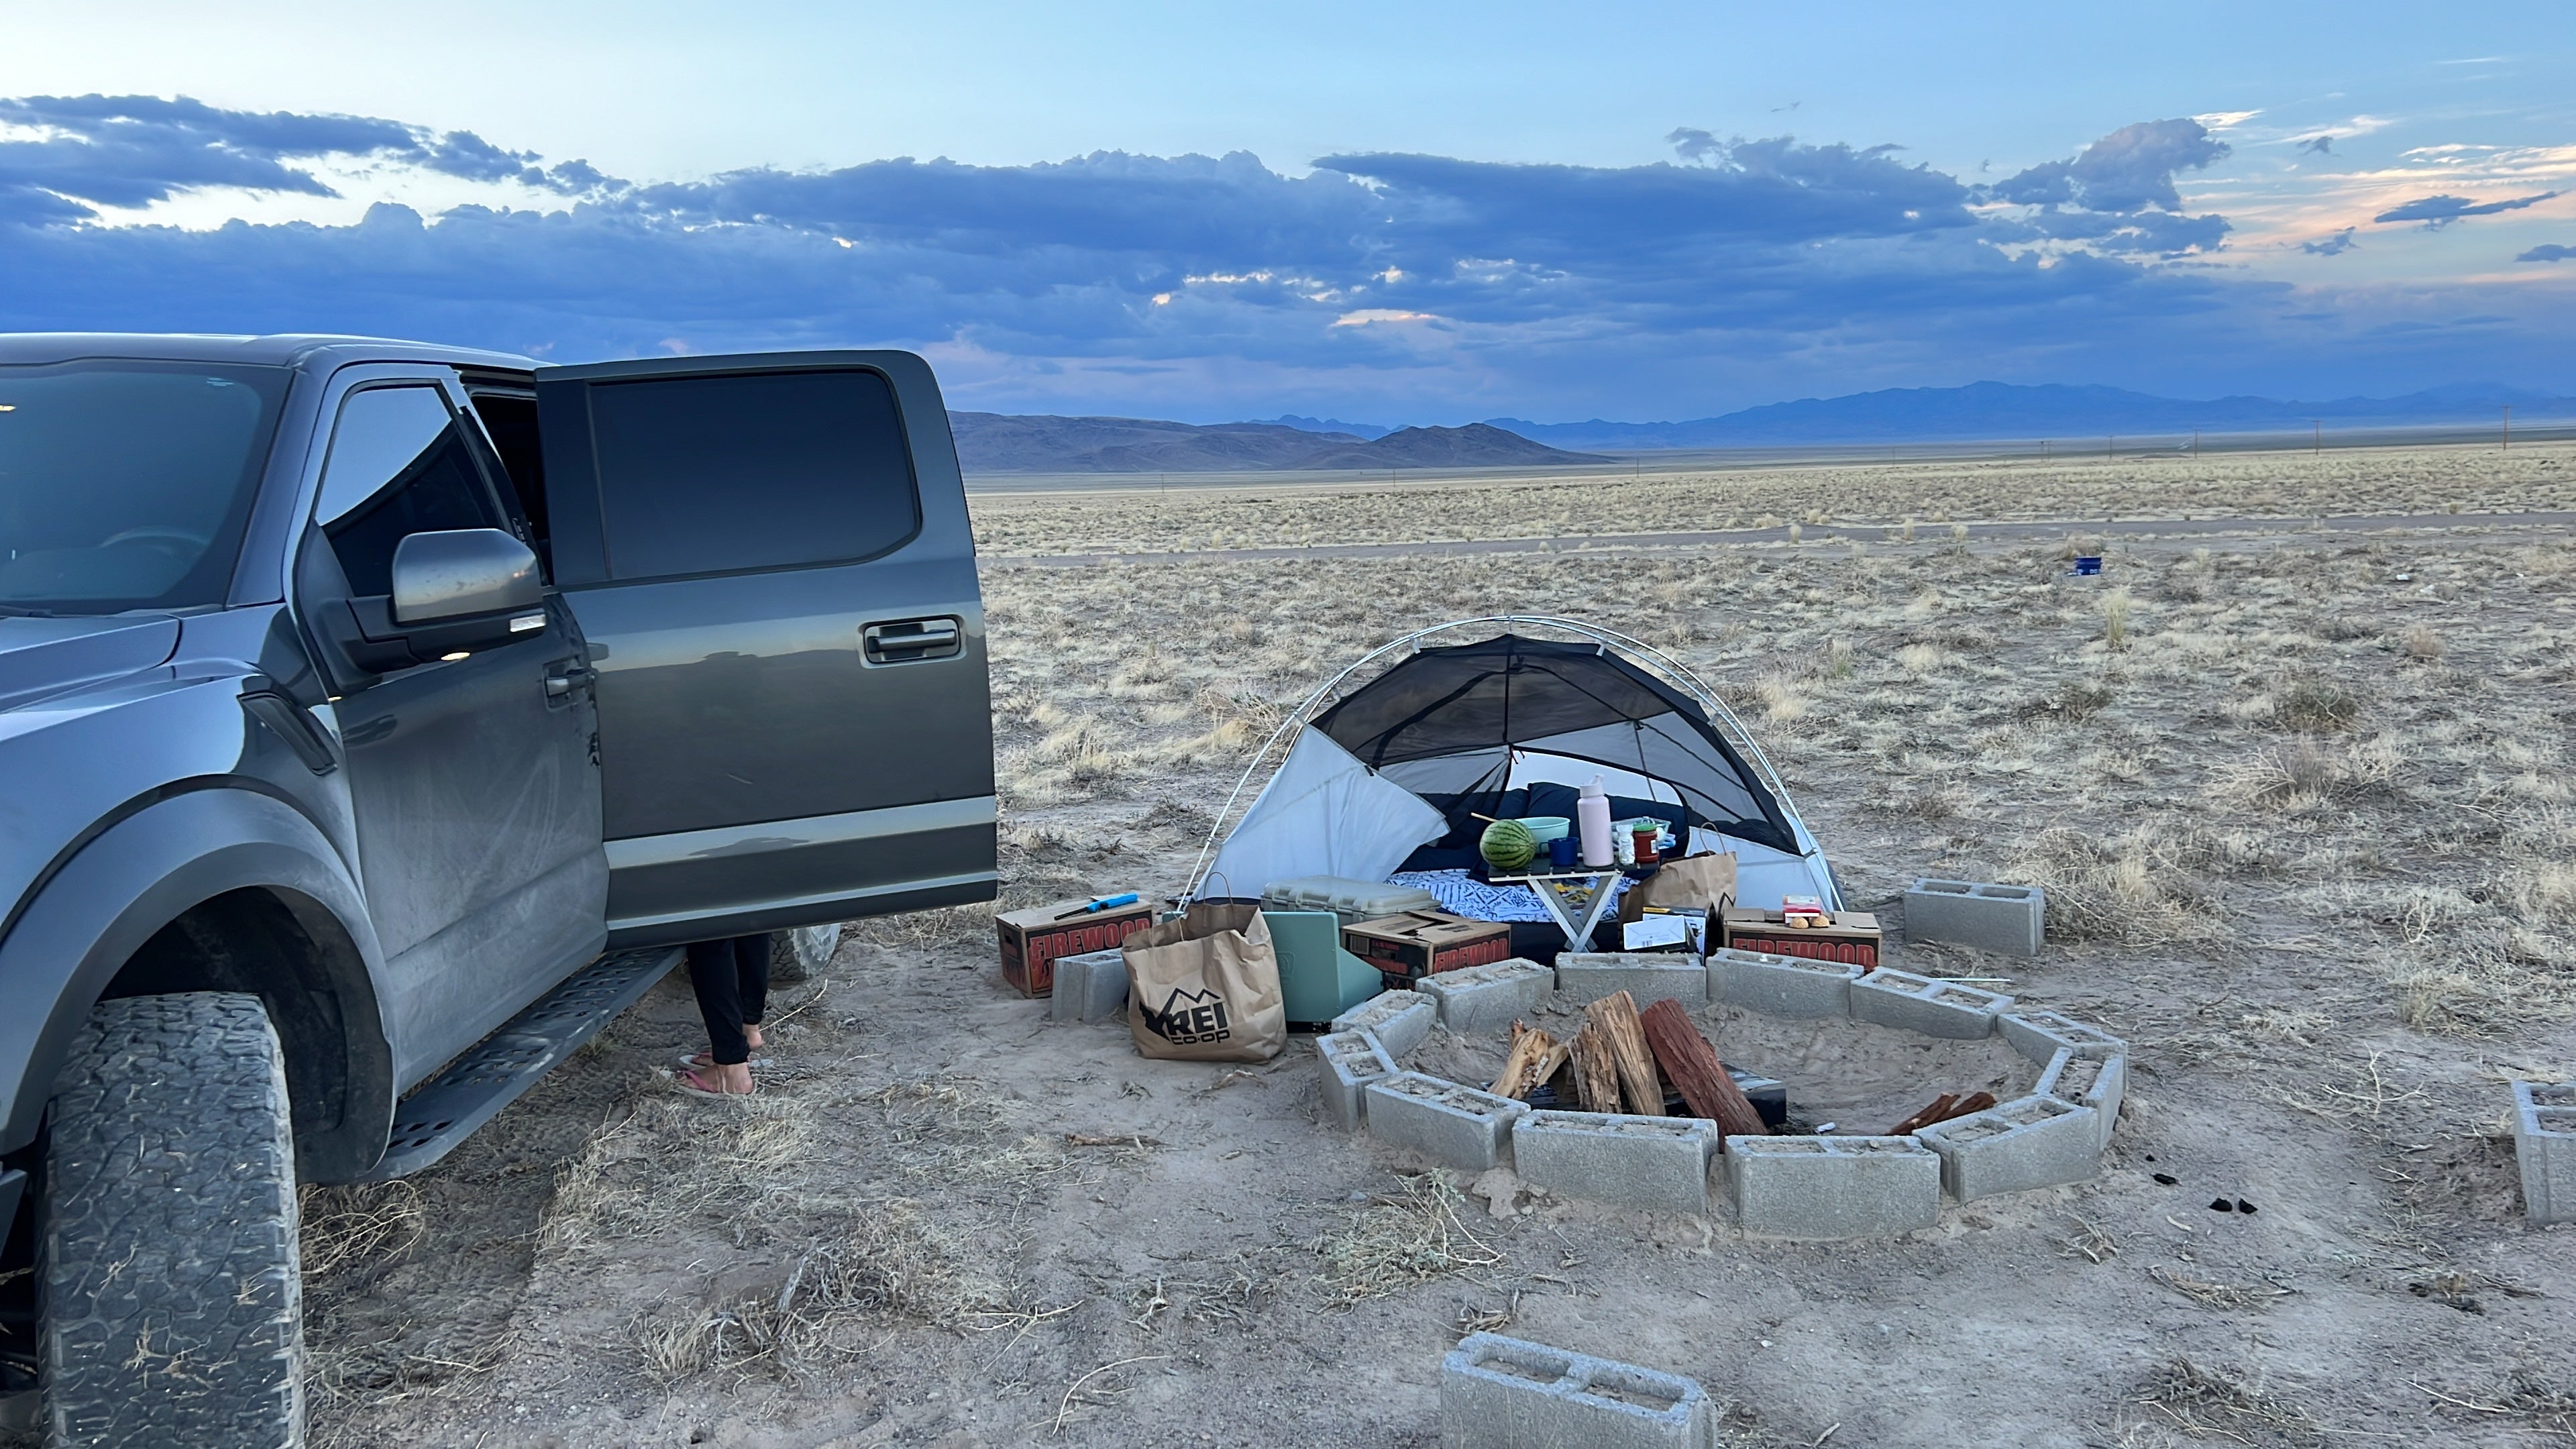 Camper submitted image from Area 51 Stake Out - Dreamland Camp  - 4